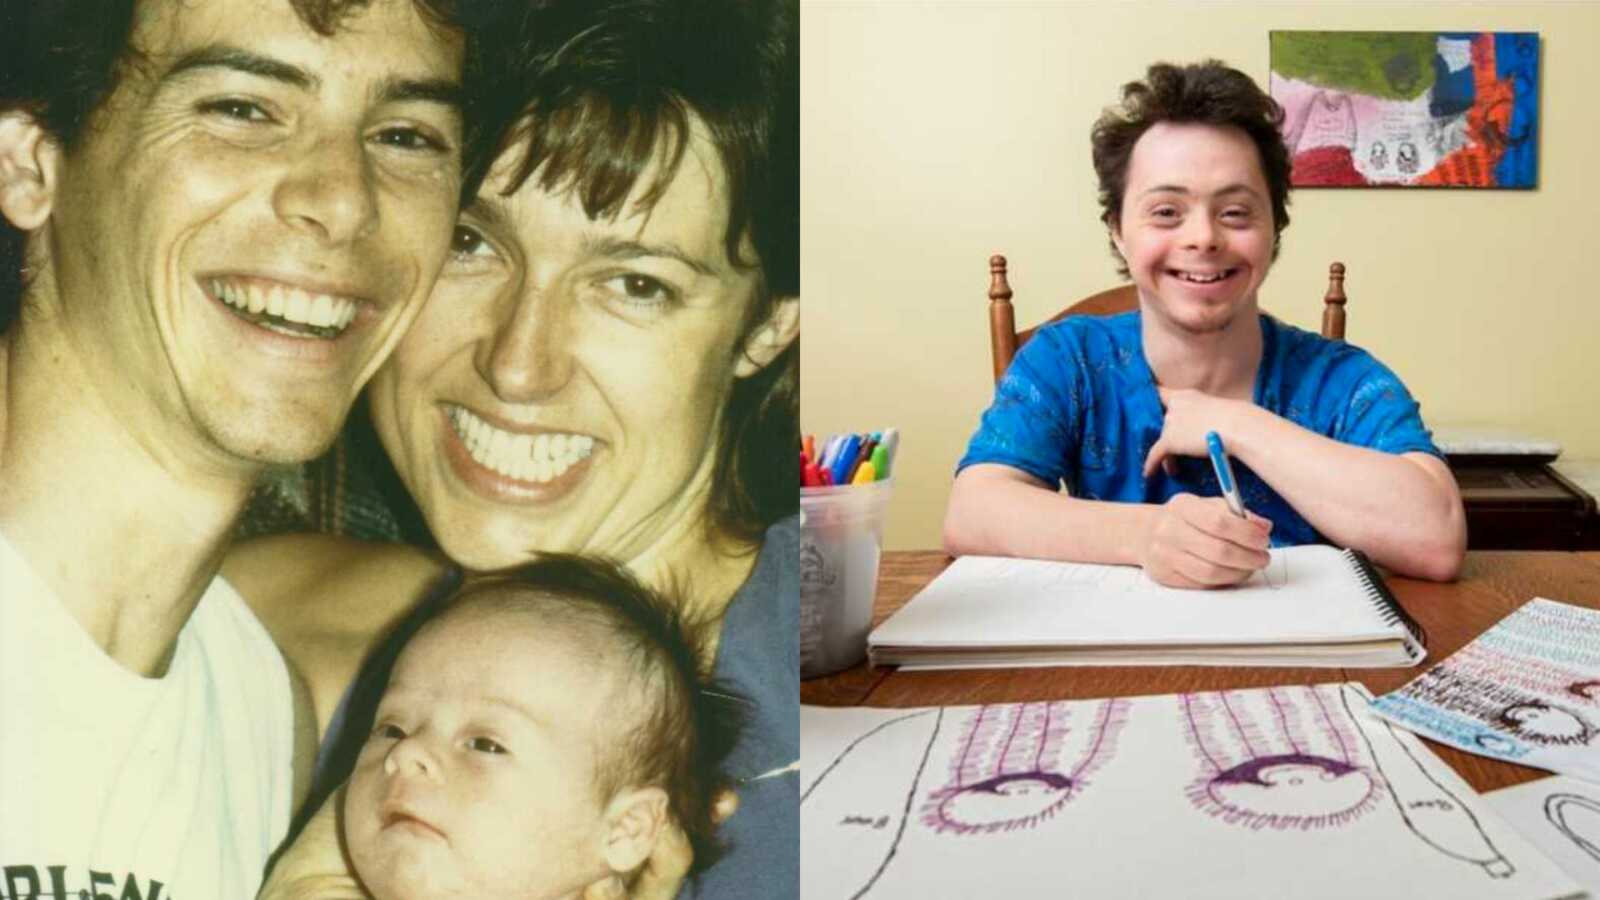 Young man with Down syndrome making art in sketchbook